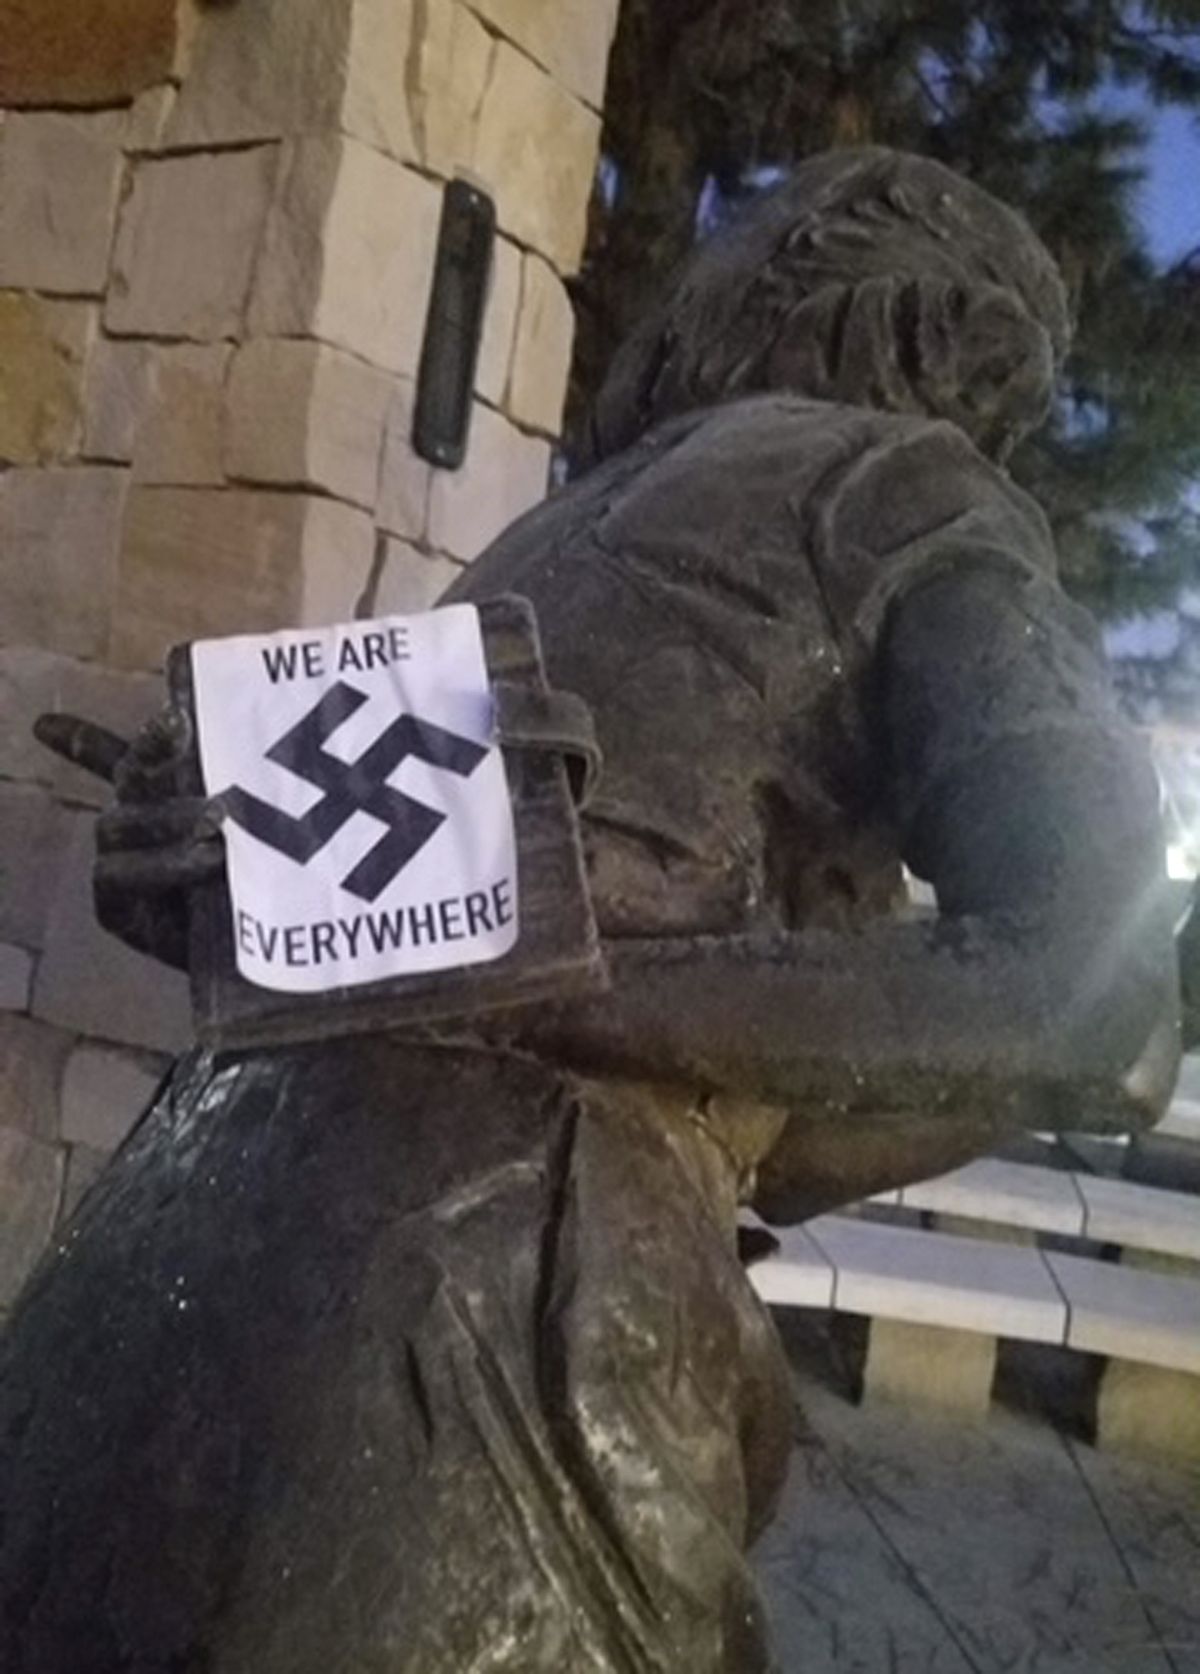 In this photo provided by the Wassmuth Center for Human Rights, a swastika sticker is seen on a sculpture at the Idaho Anne Frank Human Rights Memorial in Boise, Idaho on Tuesday, Dec. 8, 2020. Boise police are investigating after the memorial was defaced by swastika stickers earlier this week. The stickers, which included the words, "we are everywhere" as well as the Nazi insignia, were discovered Tuesday morning by a visitor to the memorial in downtown Boise.  (HONS)